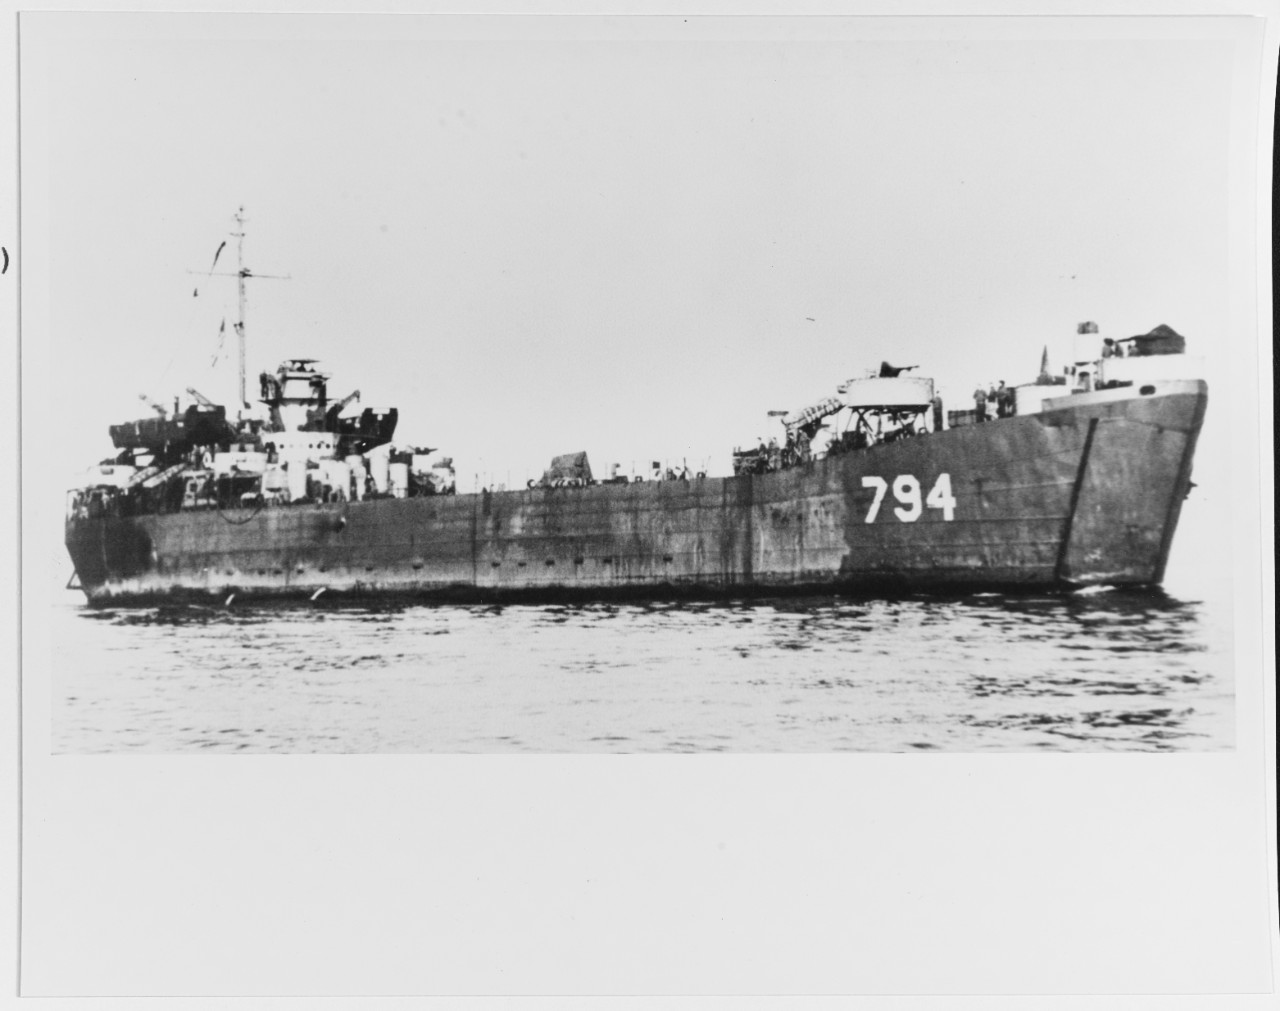 USS LST-794 (later:  GIBSON COUNTY)